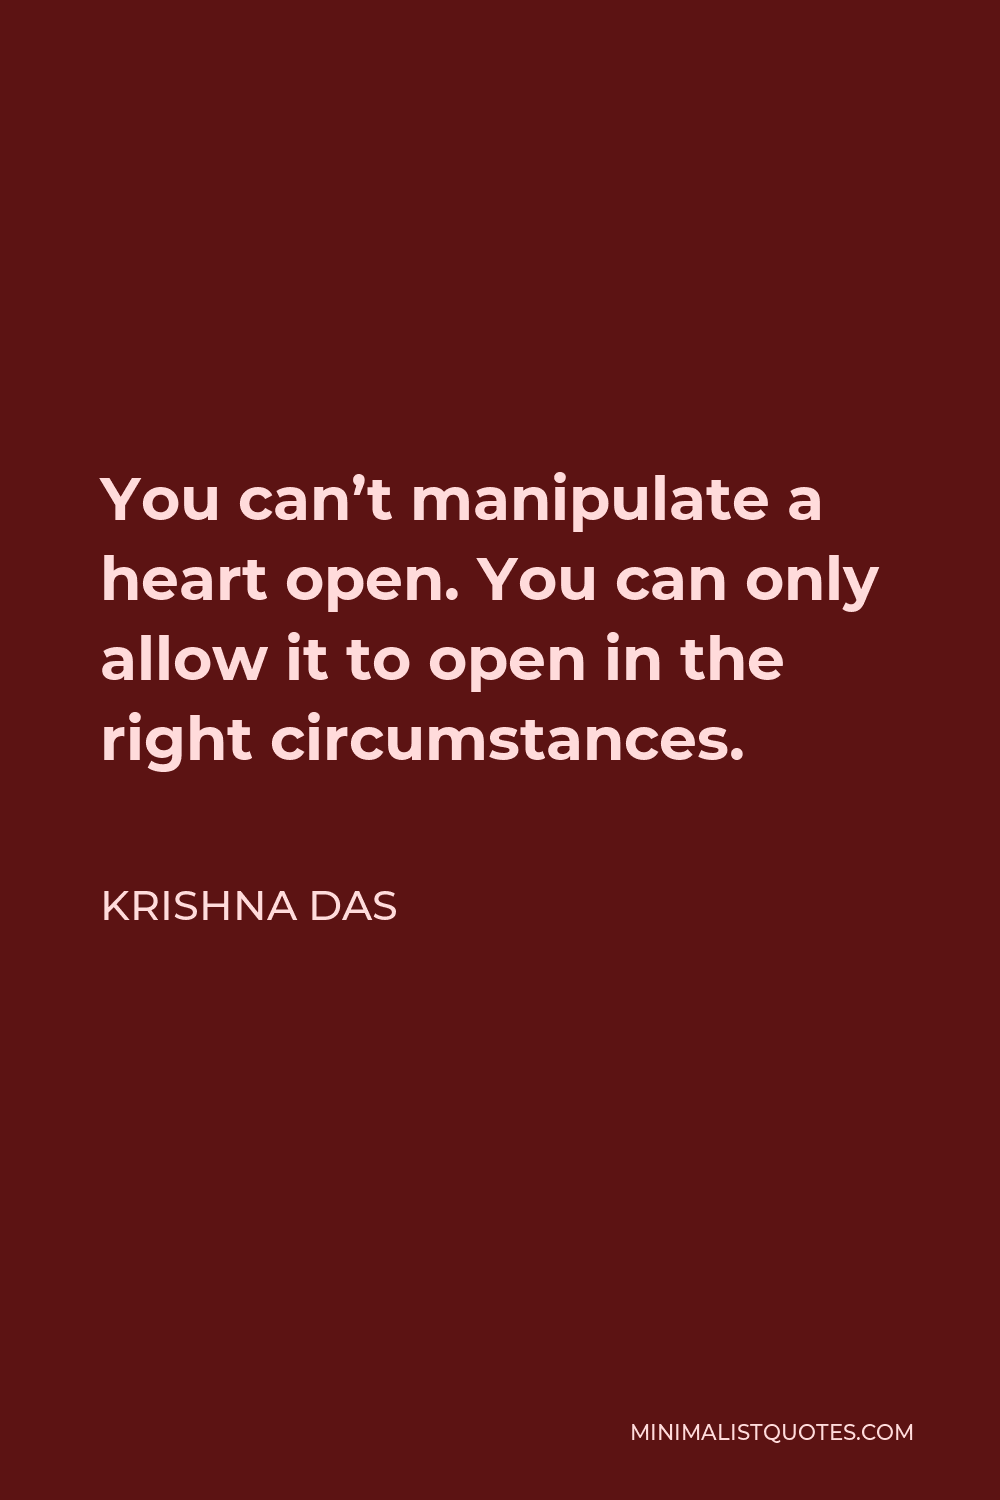 Krishna Das Quote - You can’t manipulate a heart open. You can only allow it to open in the right circumstances.